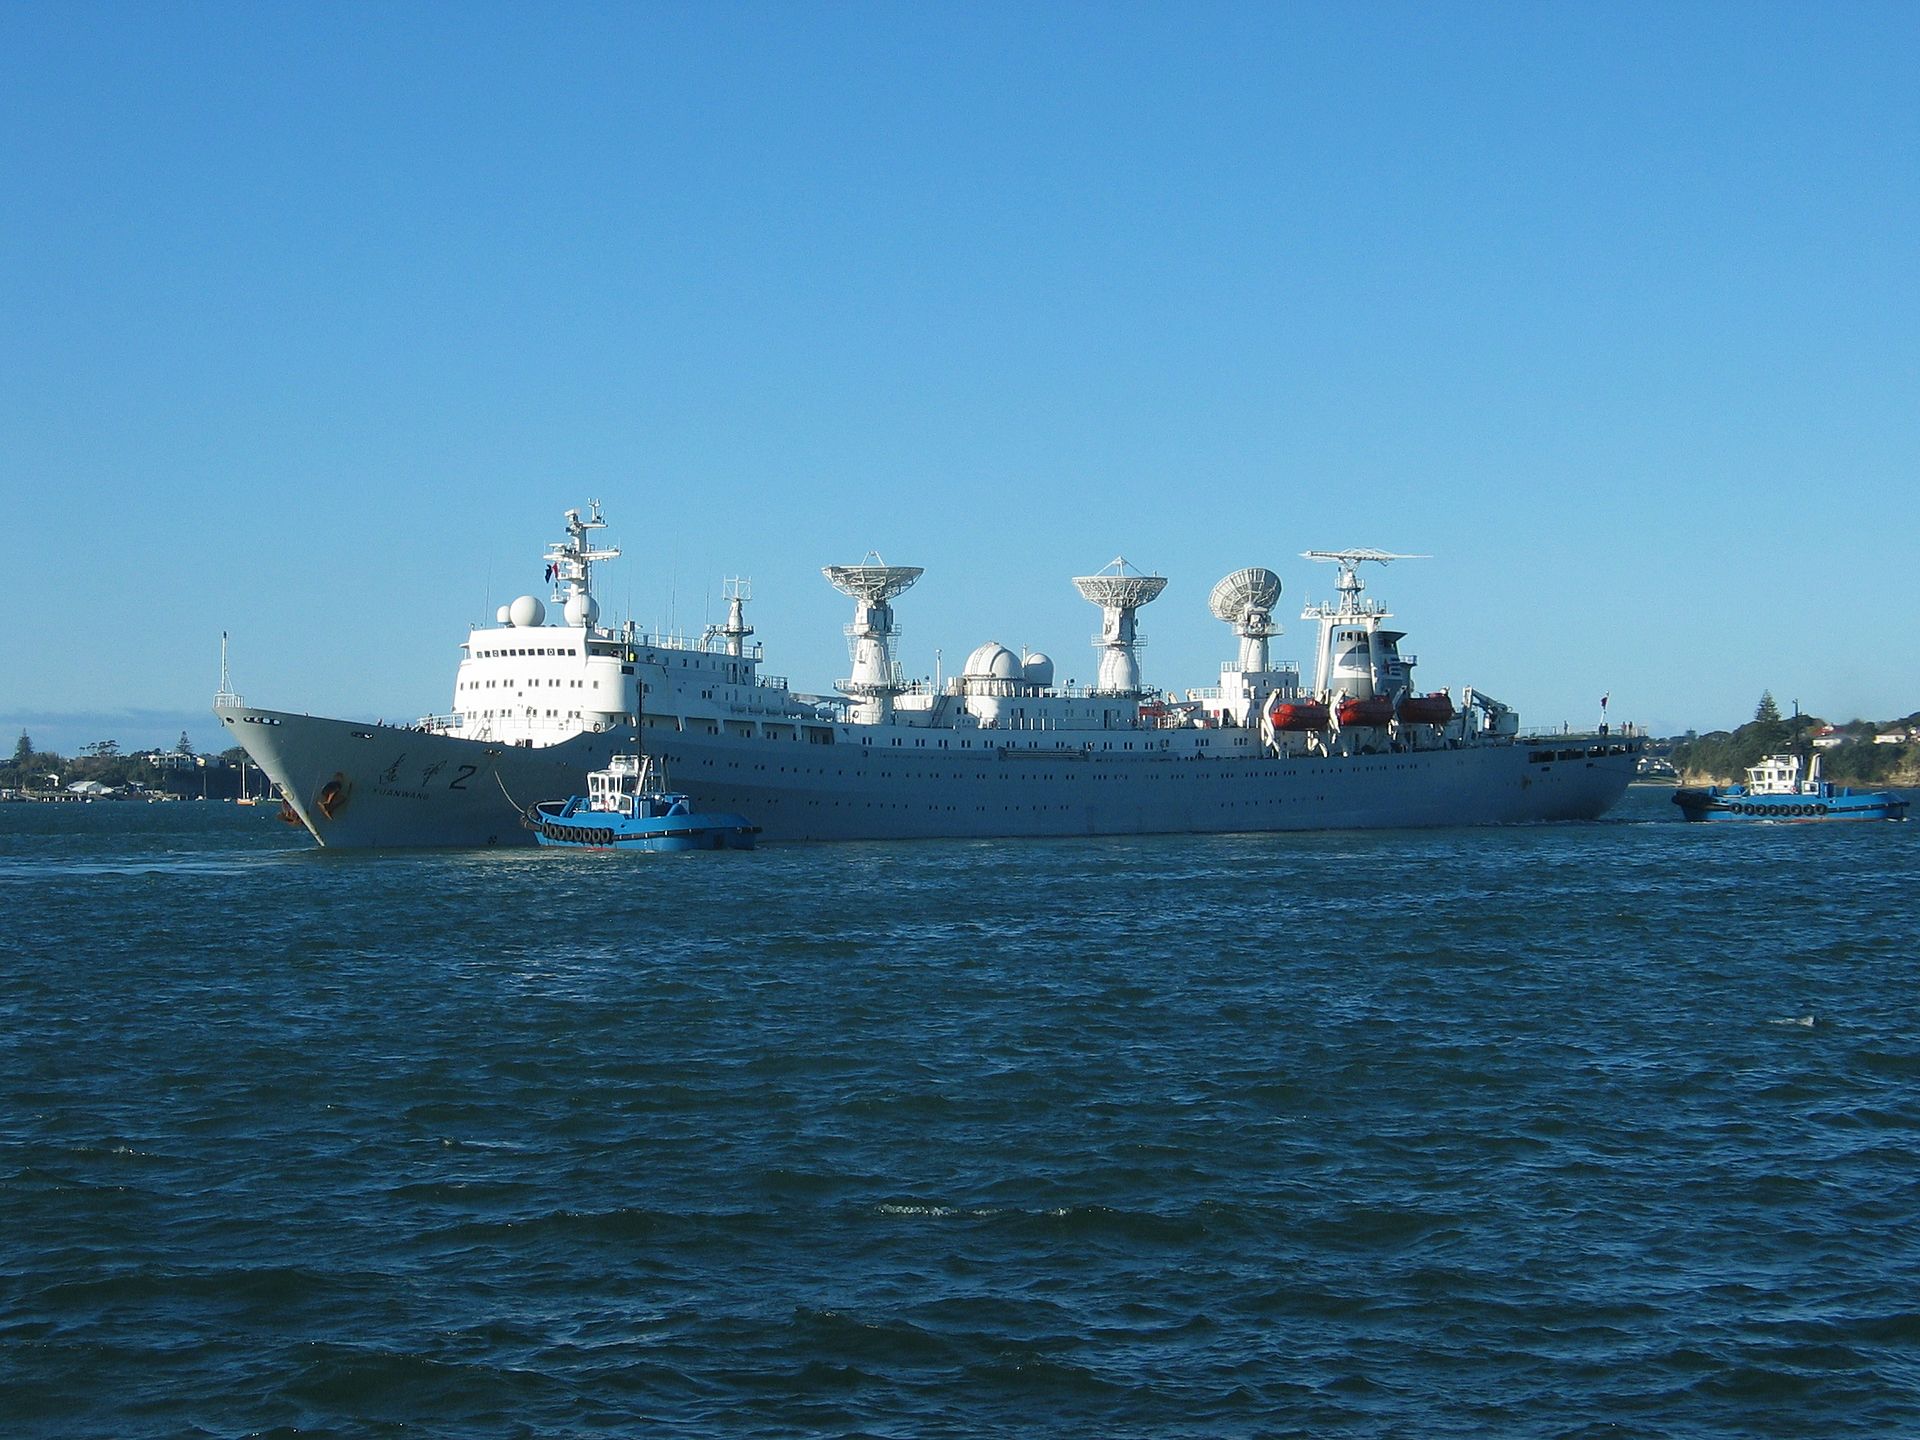 South Africa Says Contentious Chinese Ship is for Research, Not Surveillance